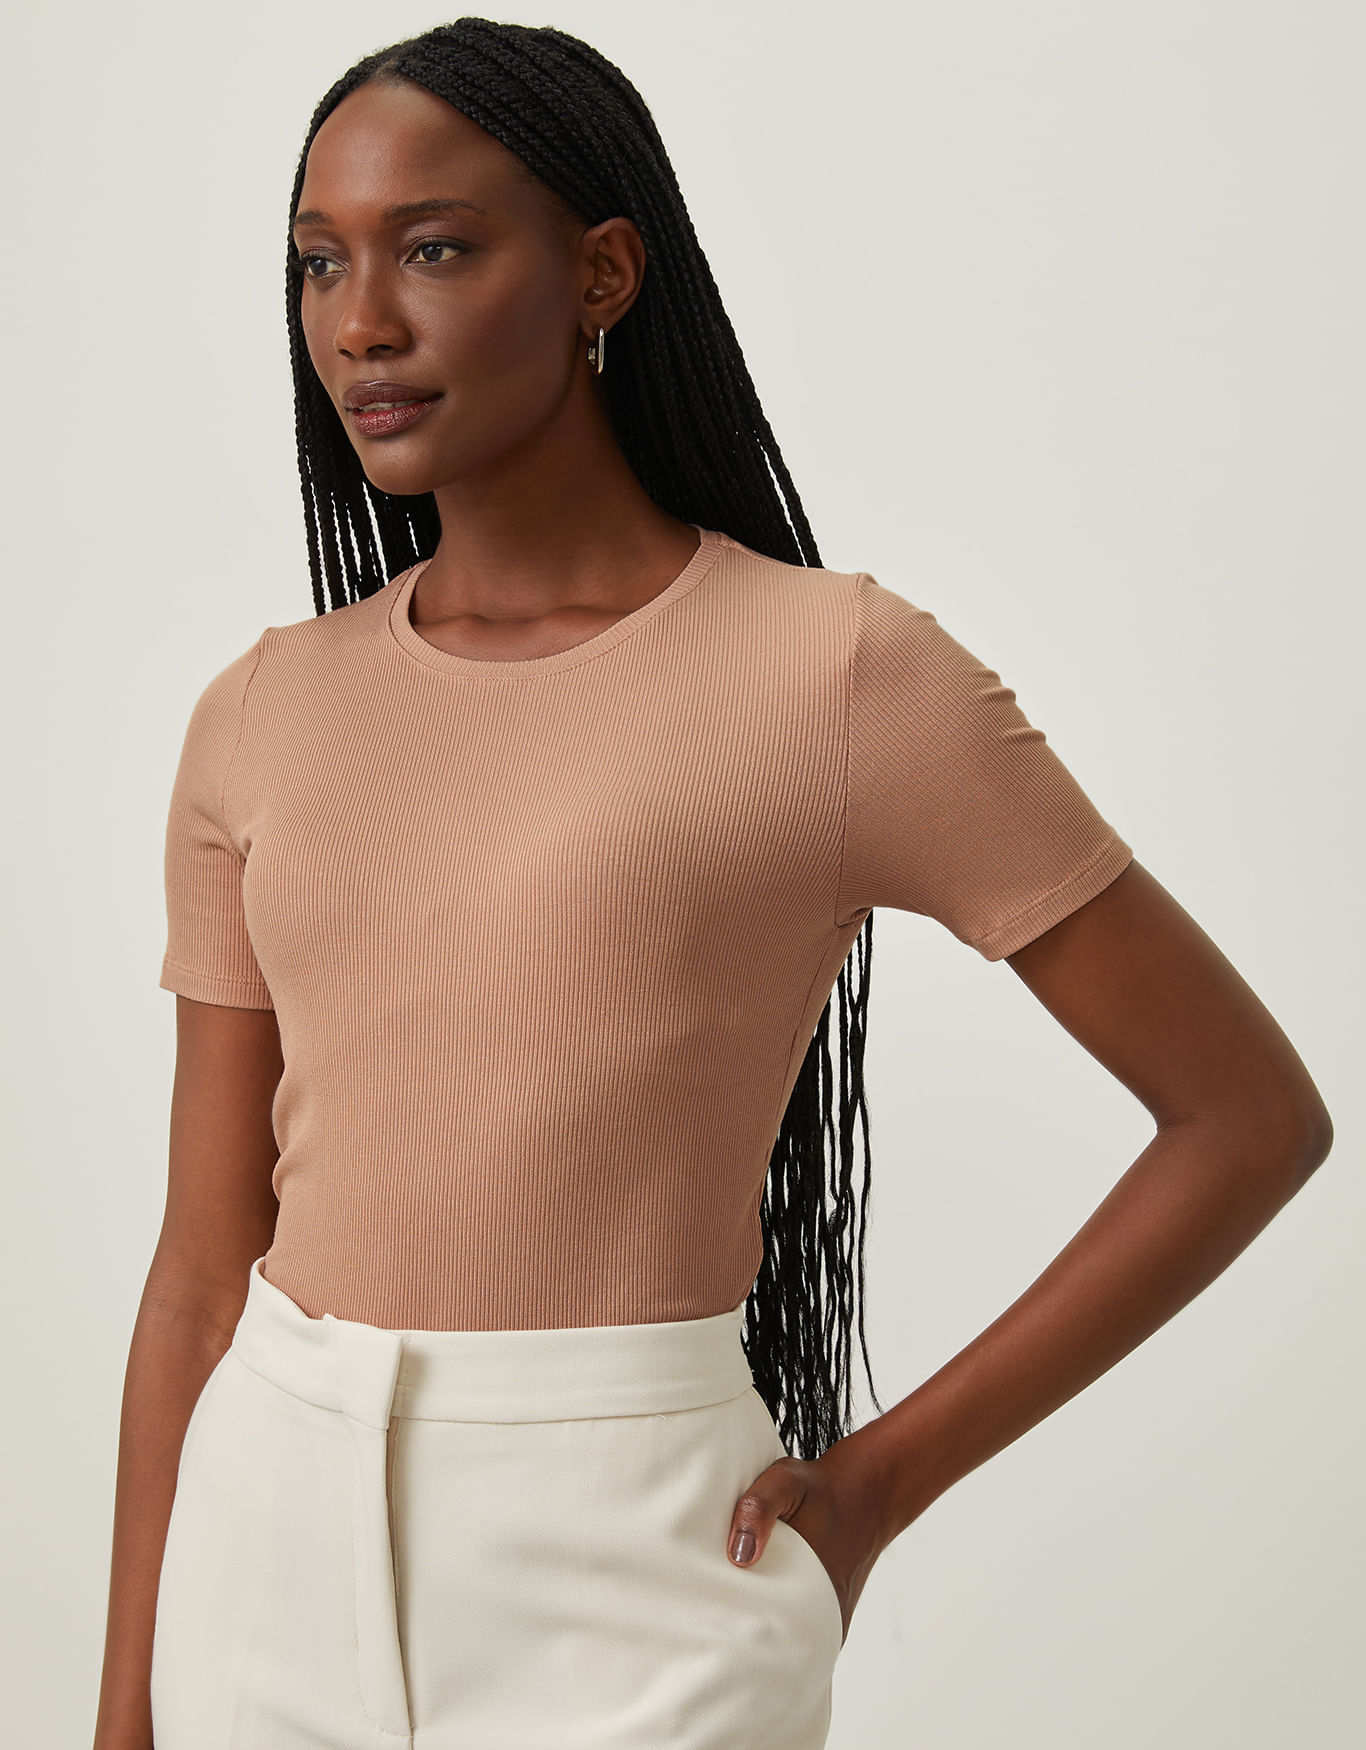 Nude Tops For Women, Nude Shirts